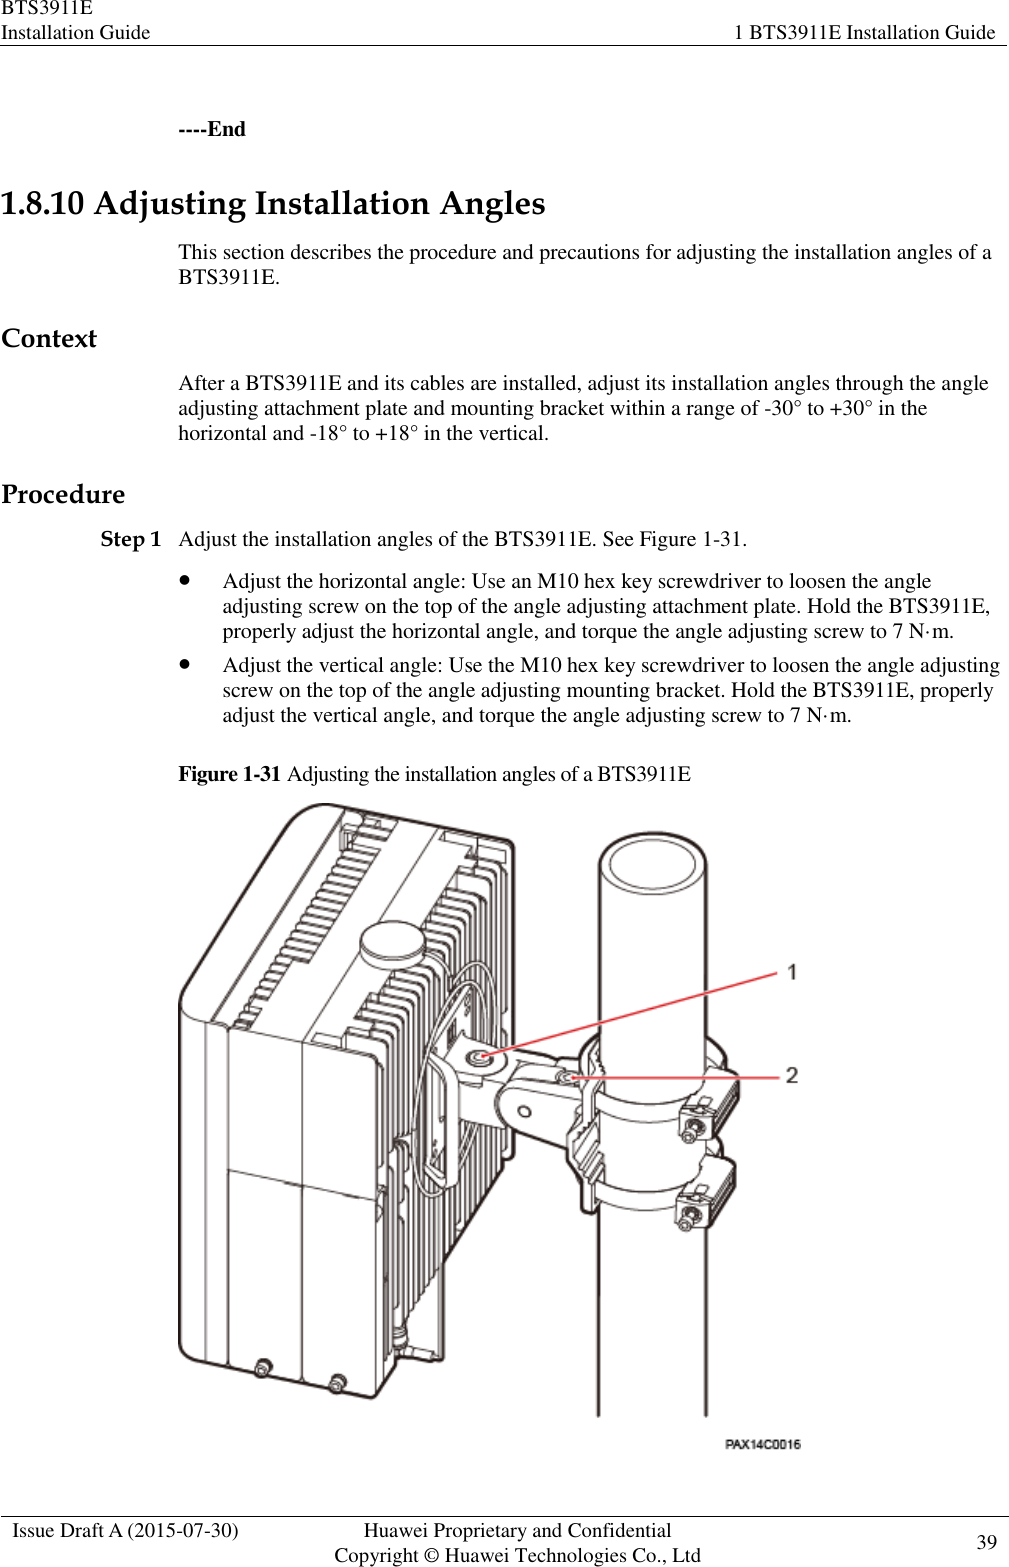 BTS3911E Installation Guide 1 BTS3911E Installation Guide  Issue Draft A (2015-07-30) Huawei Proprietary and Confidential           Copyright © Huawei Technologies Co., Ltd 39     ----End 1.8.10 Adjusting Installation Angles This section describes the procedure and precautions for adjusting the installation angles of a BTS3911E. Context After a BTS3911E and its cables are installed, adjust its installation angles through the angle adjusting attachment plate and mounting bracket within a range of -30° to +30° in the horizontal and -18° to +18° in the vertical. Procedure Step 1 Adjust the installation angles of the BTS3911E. See Figure 1-31.  Adjust the horizontal angle: Use an M10 hex key screwdriver to loosen the angle adjusting screw on the top of the angle adjusting attachment plate. Hold the BTS3911E, properly adjust the horizontal angle, and torque the angle adjusting screw to 7 N·m.  Adjust the vertical angle: Use the M10 hex key screwdriver to loosen the angle adjusting screw on the top of the angle adjusting mounting bracket. Hold the BTS3911E, properly adjust the vertical angle, and torque the angle adjusting screw to 7 N·m. Figure 1-31 Adjusting the installation angles of a BTS3911E  